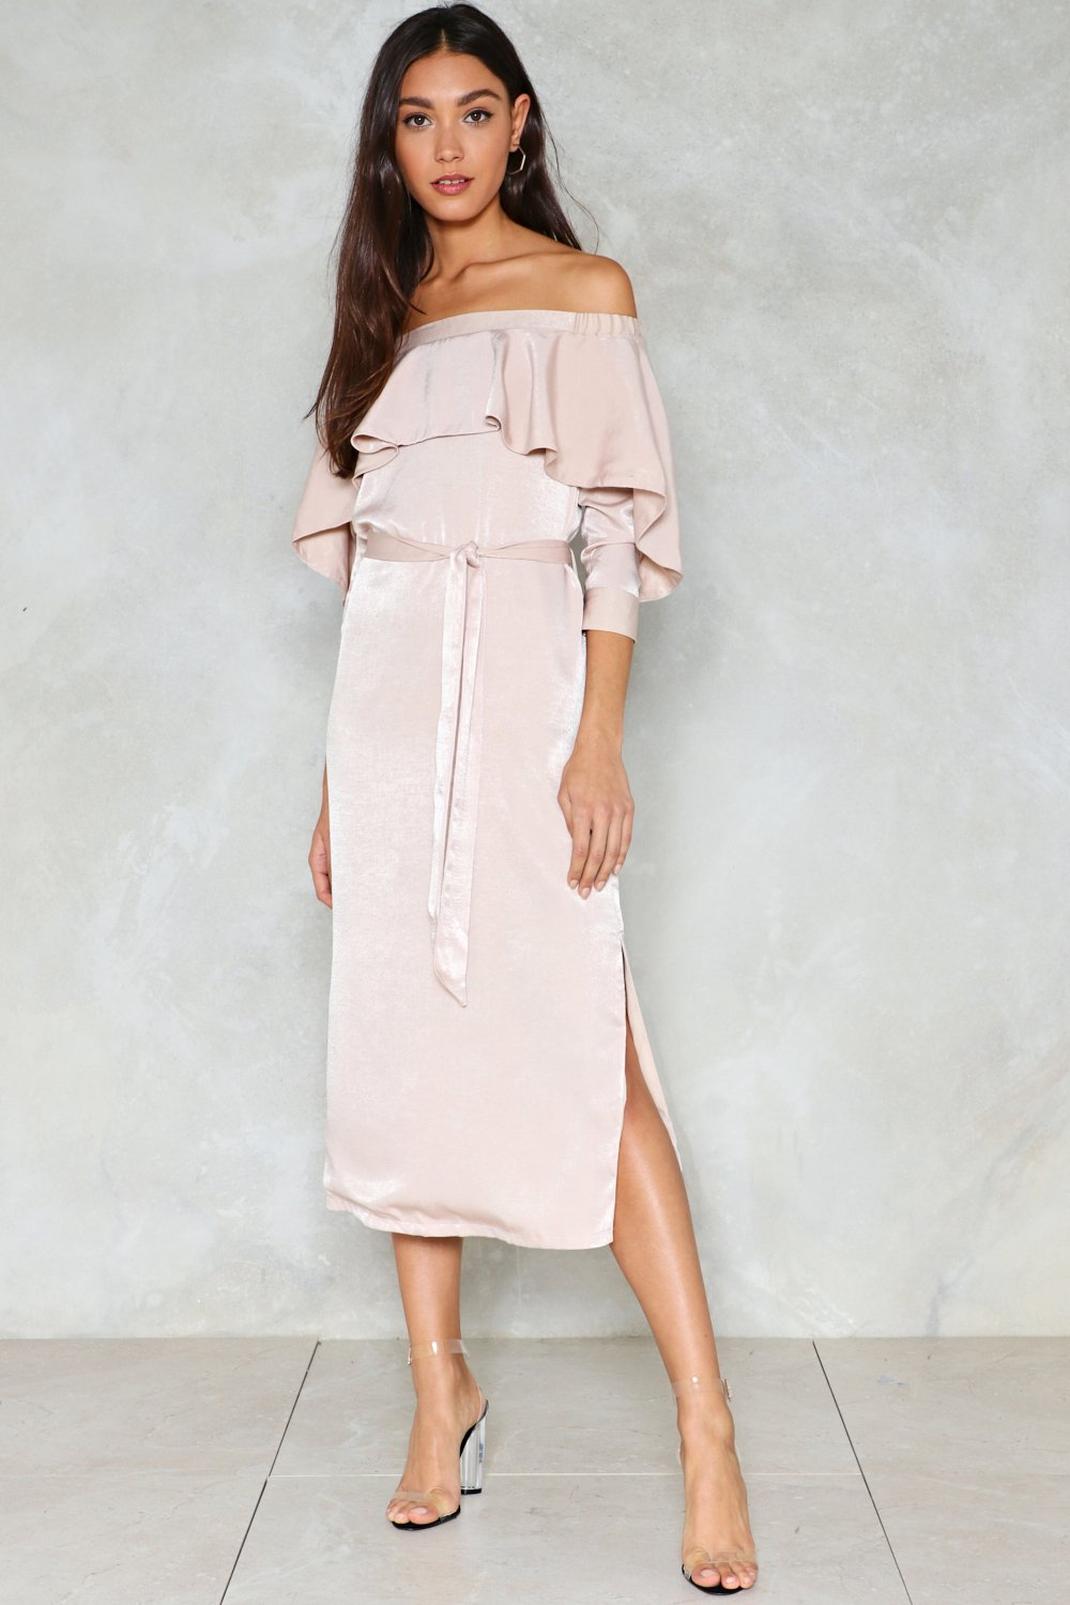 Above It All Satin Dress | Nasty Gal